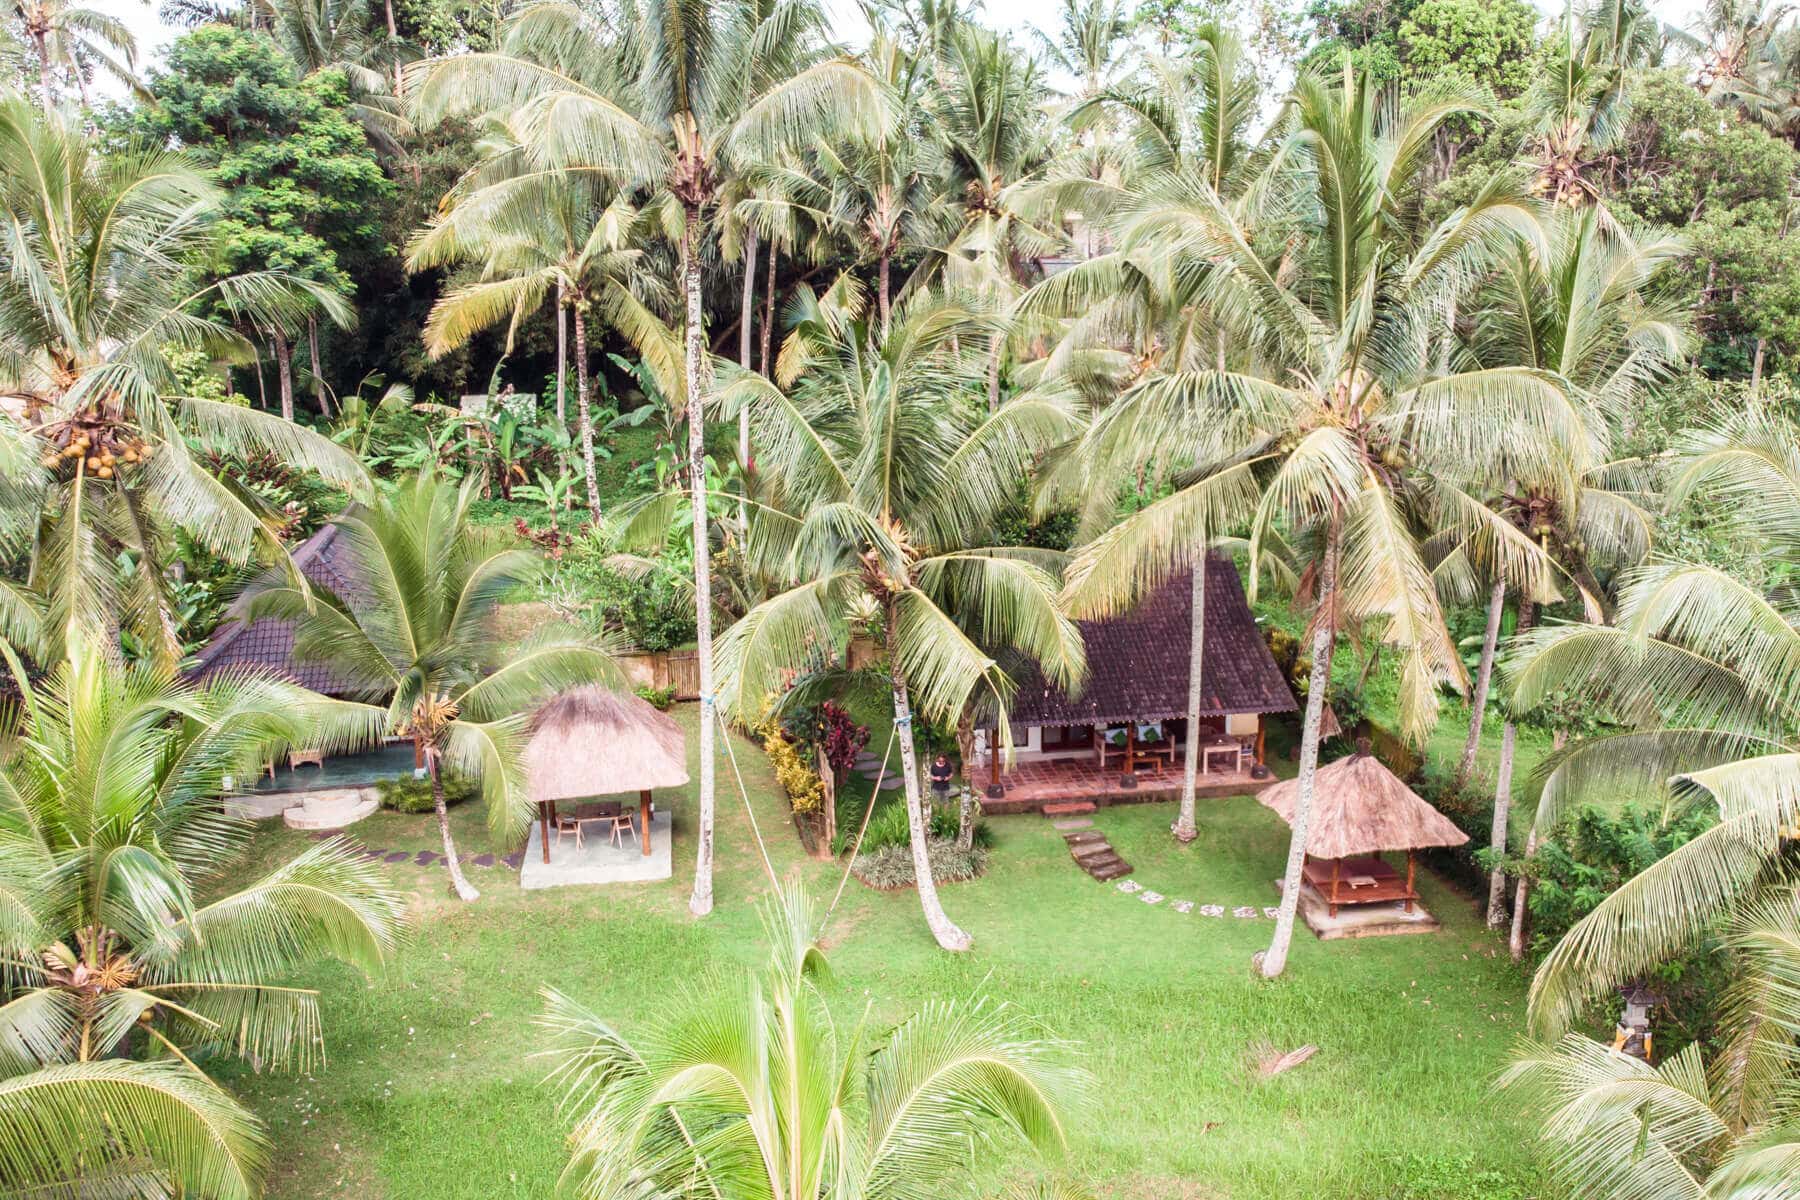 Island Life #4 - Our awesome Airbnb in Ubud